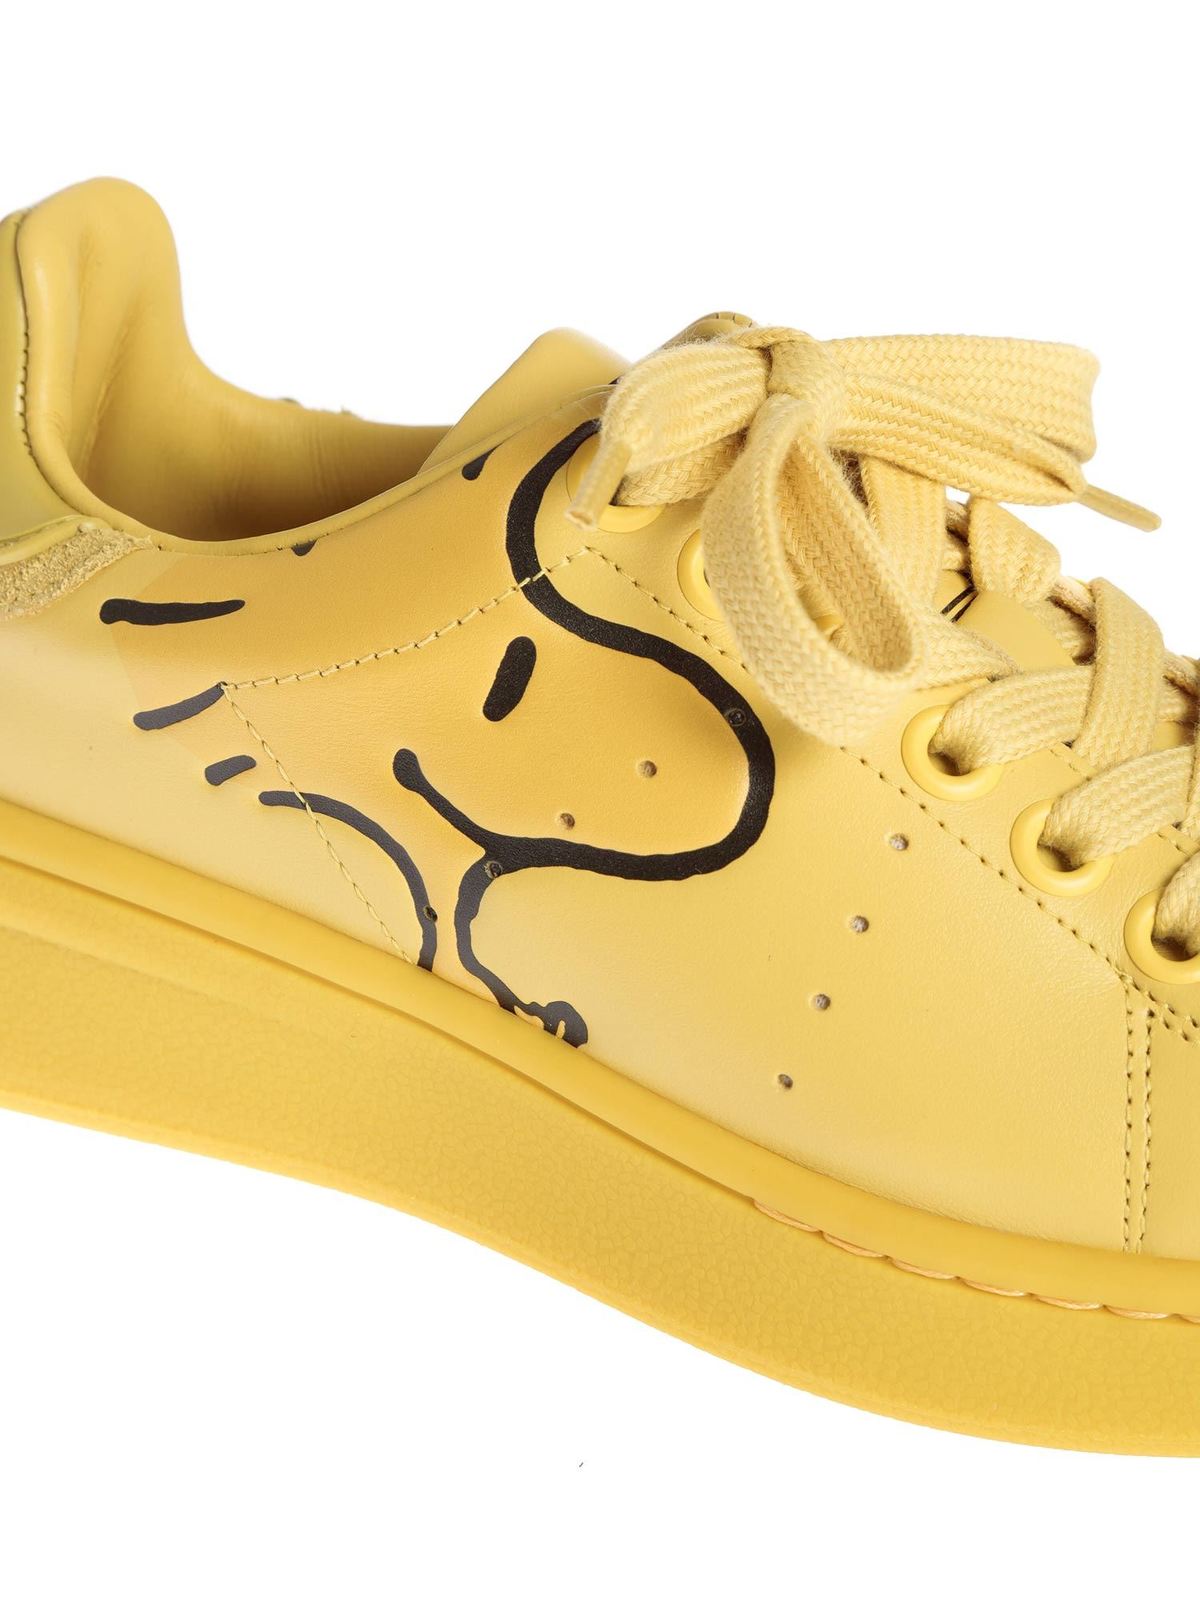 Trainers Marc Jacobs - Peanuts x The Tennis Shoe in yellow